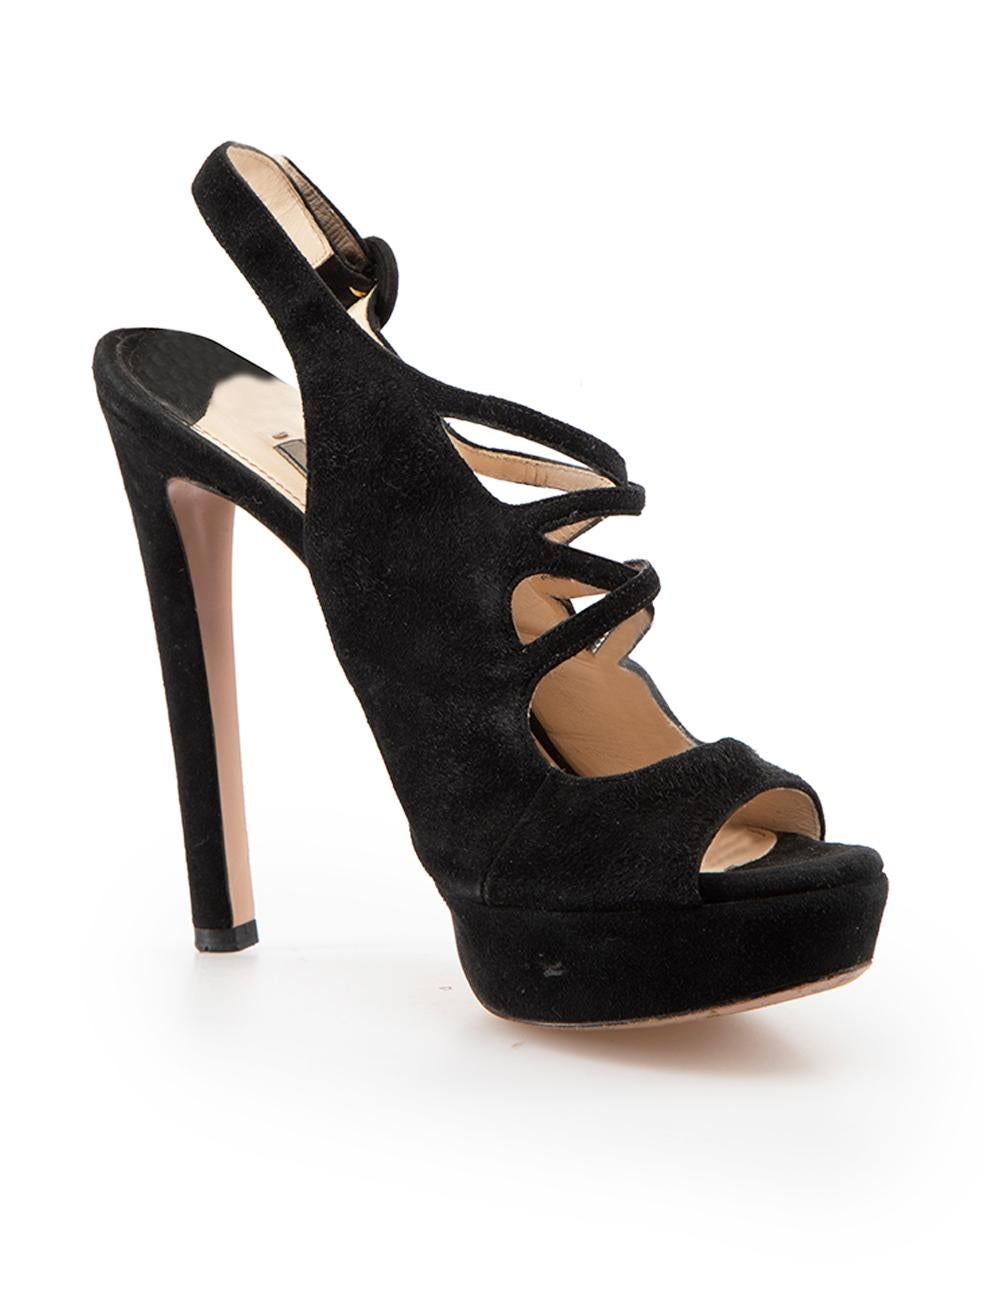 CONDITION is Very good. Minimal wear to shoes is evident. Minimal wear to both sides and heels of both shoes with abrasions to the suede on this used Prada designer resale item.
 
Details
Black
Suede
Heeled sandals
Peep toe
Adjustable slingback